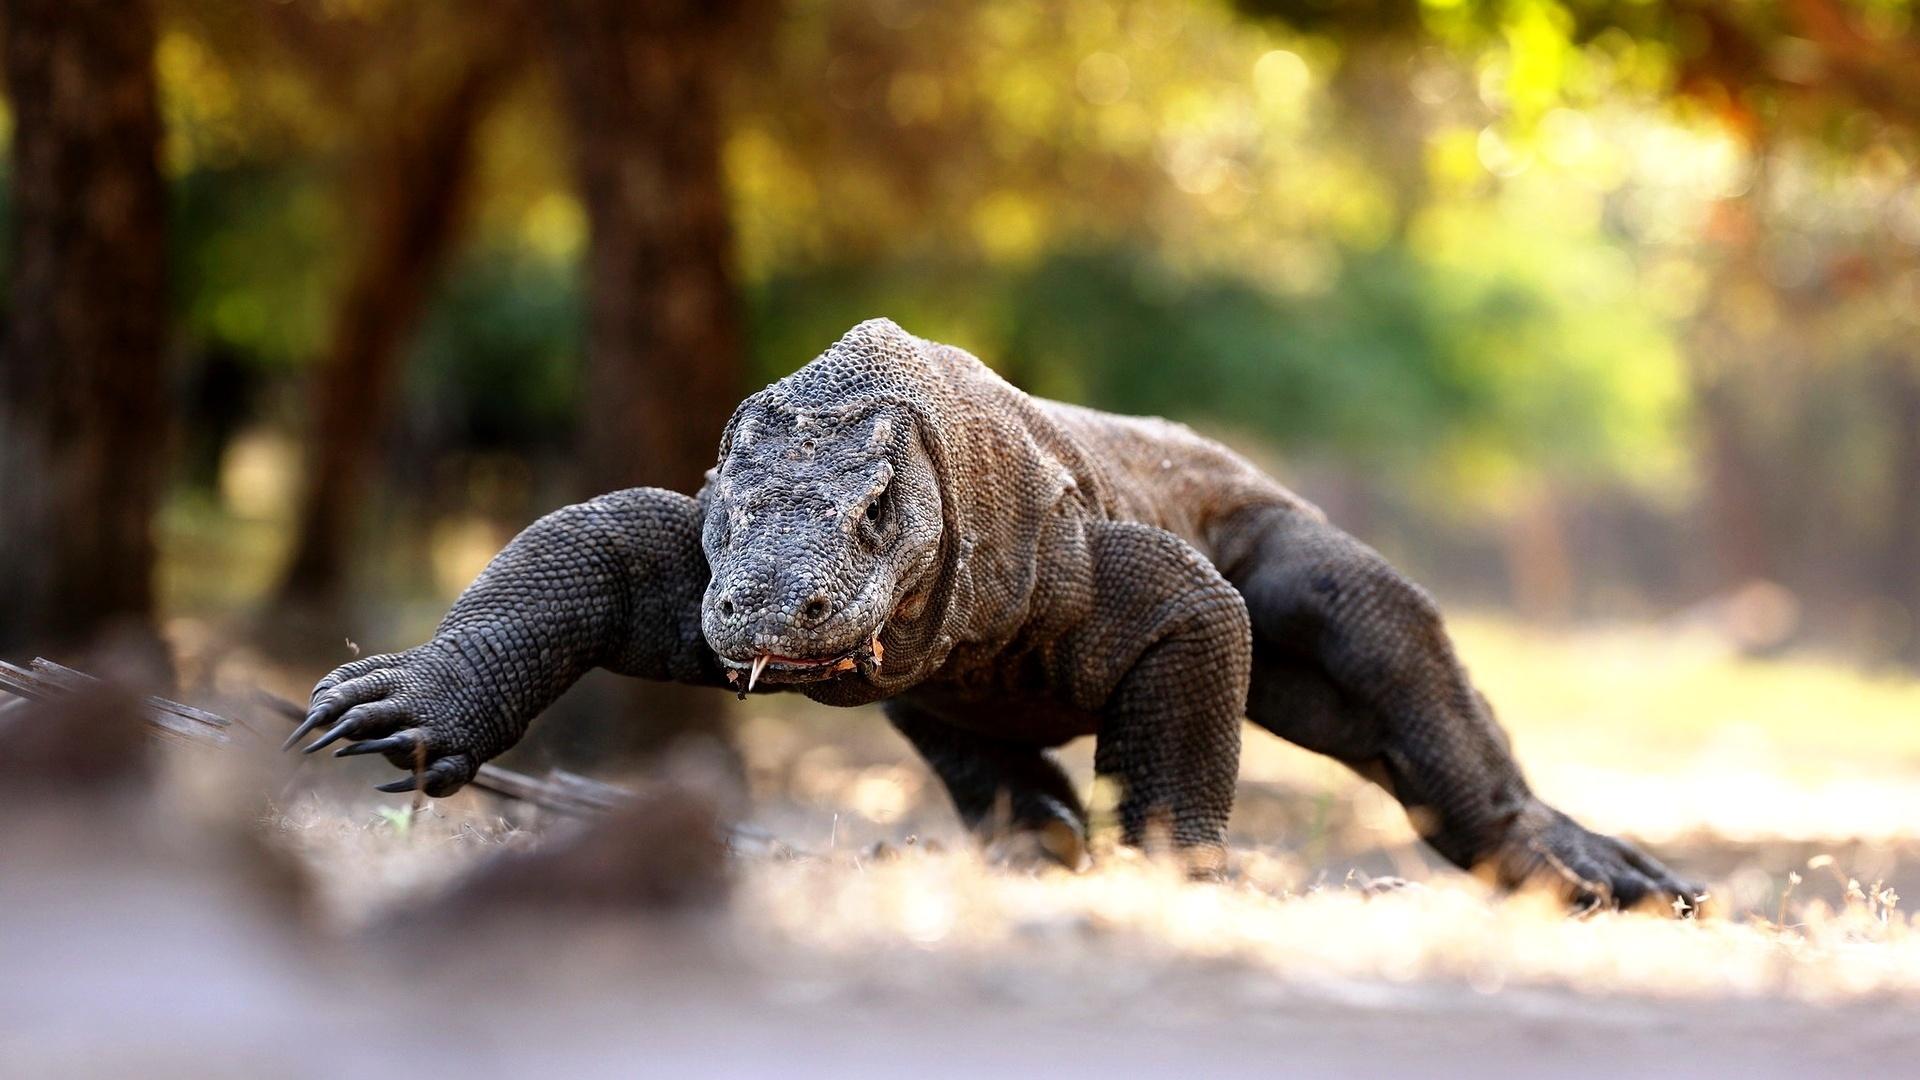 how secure is comodo dragon